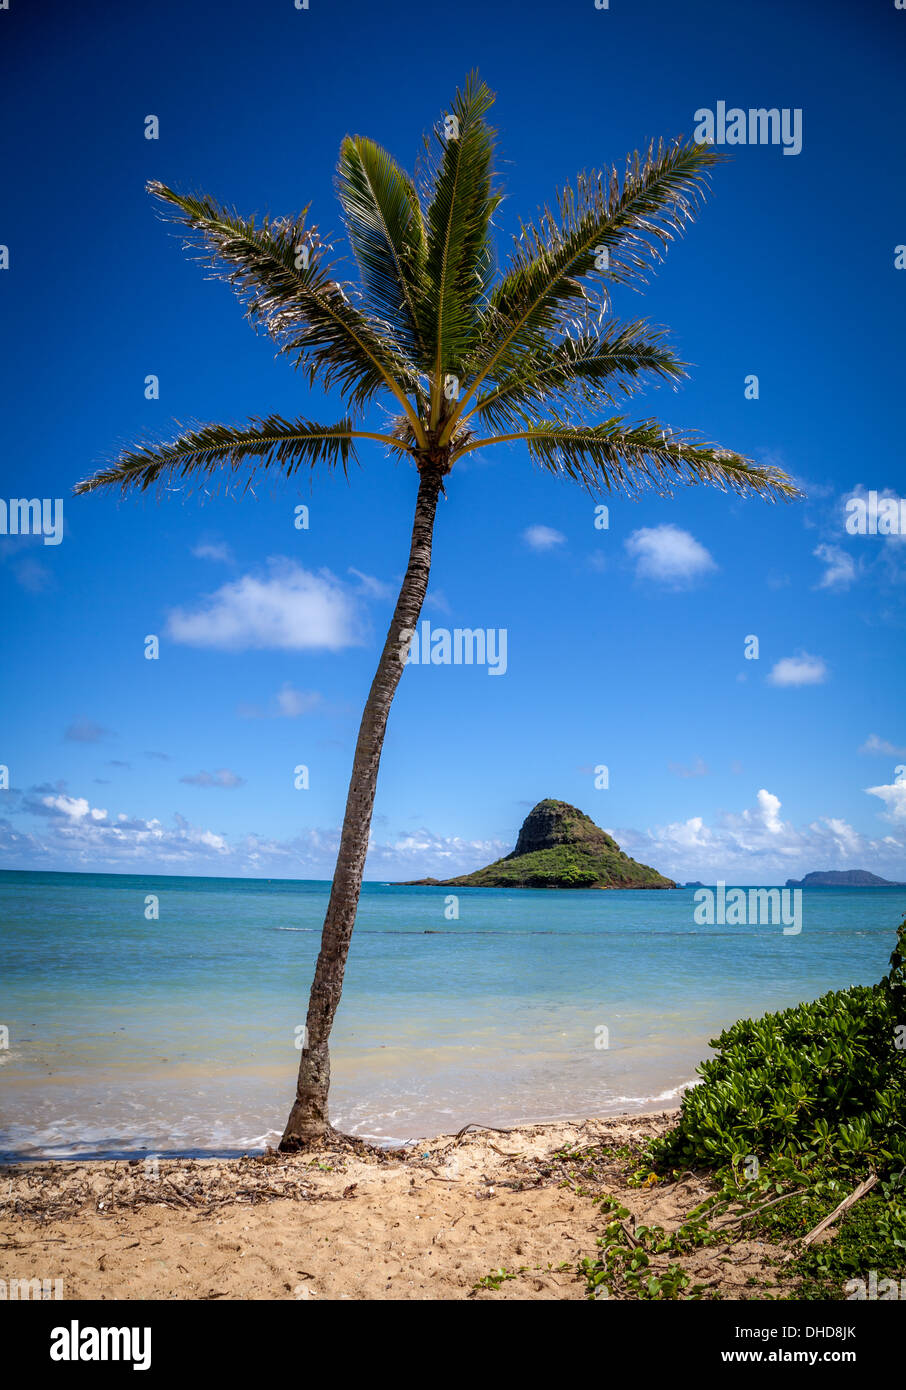 Mokoli'i Island (previously known as the outdated term 'Chinaman's Hat') off the Windward coast of Oahu Stock Photo